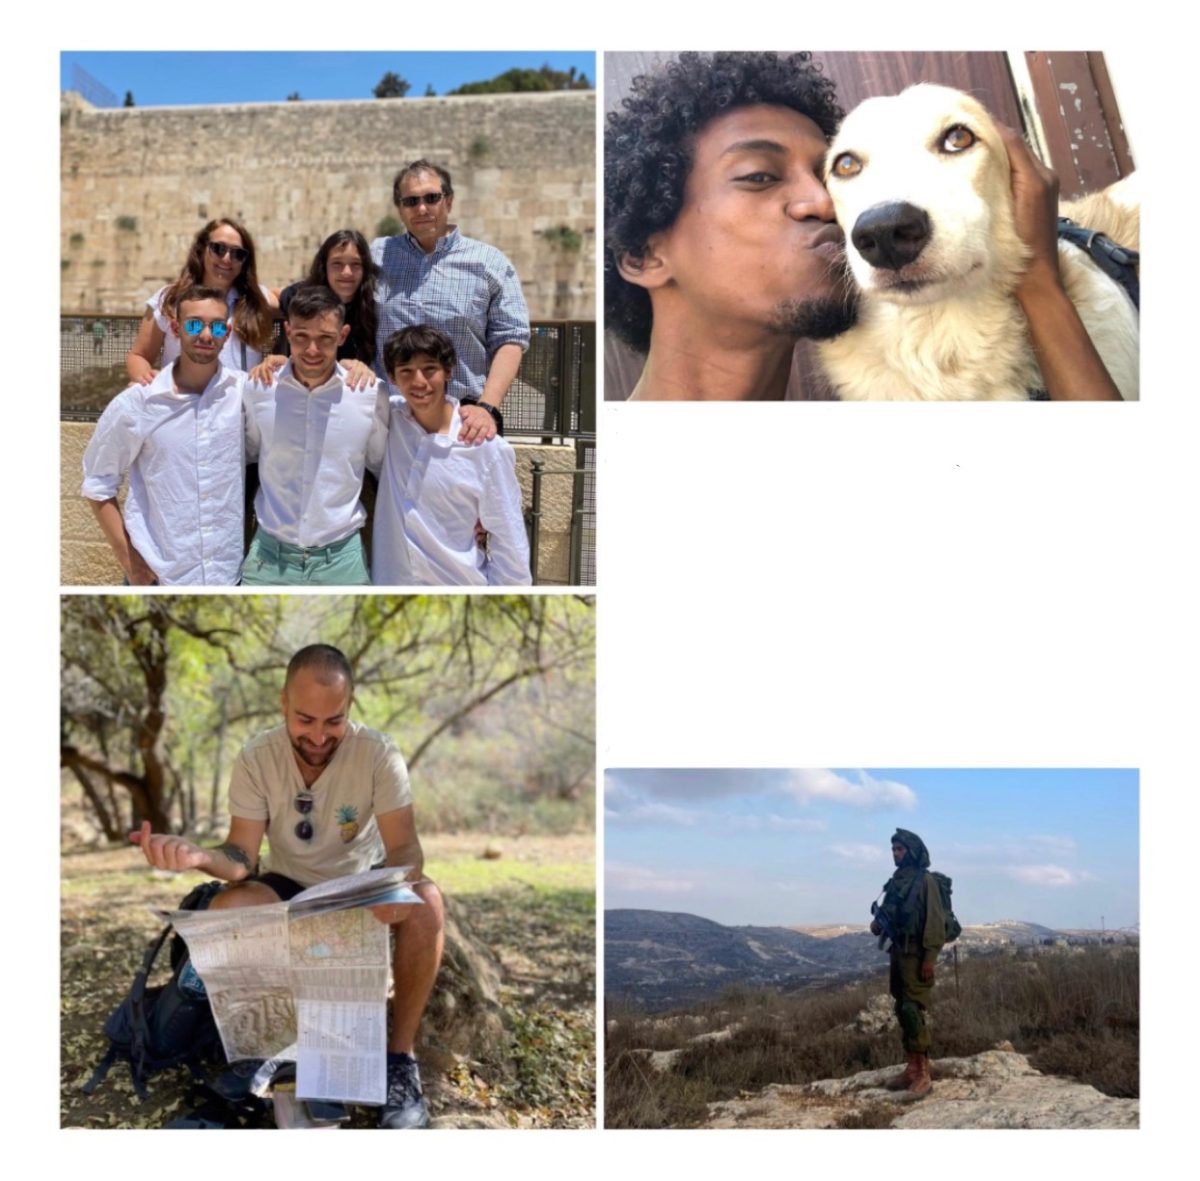 Collage+by+Molly+Myers.+Left+top+photo%3A+Yarin+Dan+and+his+family.+Bottom+left%3A+Ofir+Lefler.+Top+right%3A+Alemo+Abraham.+Bottom+right%3A+Ashta+Yehuda.